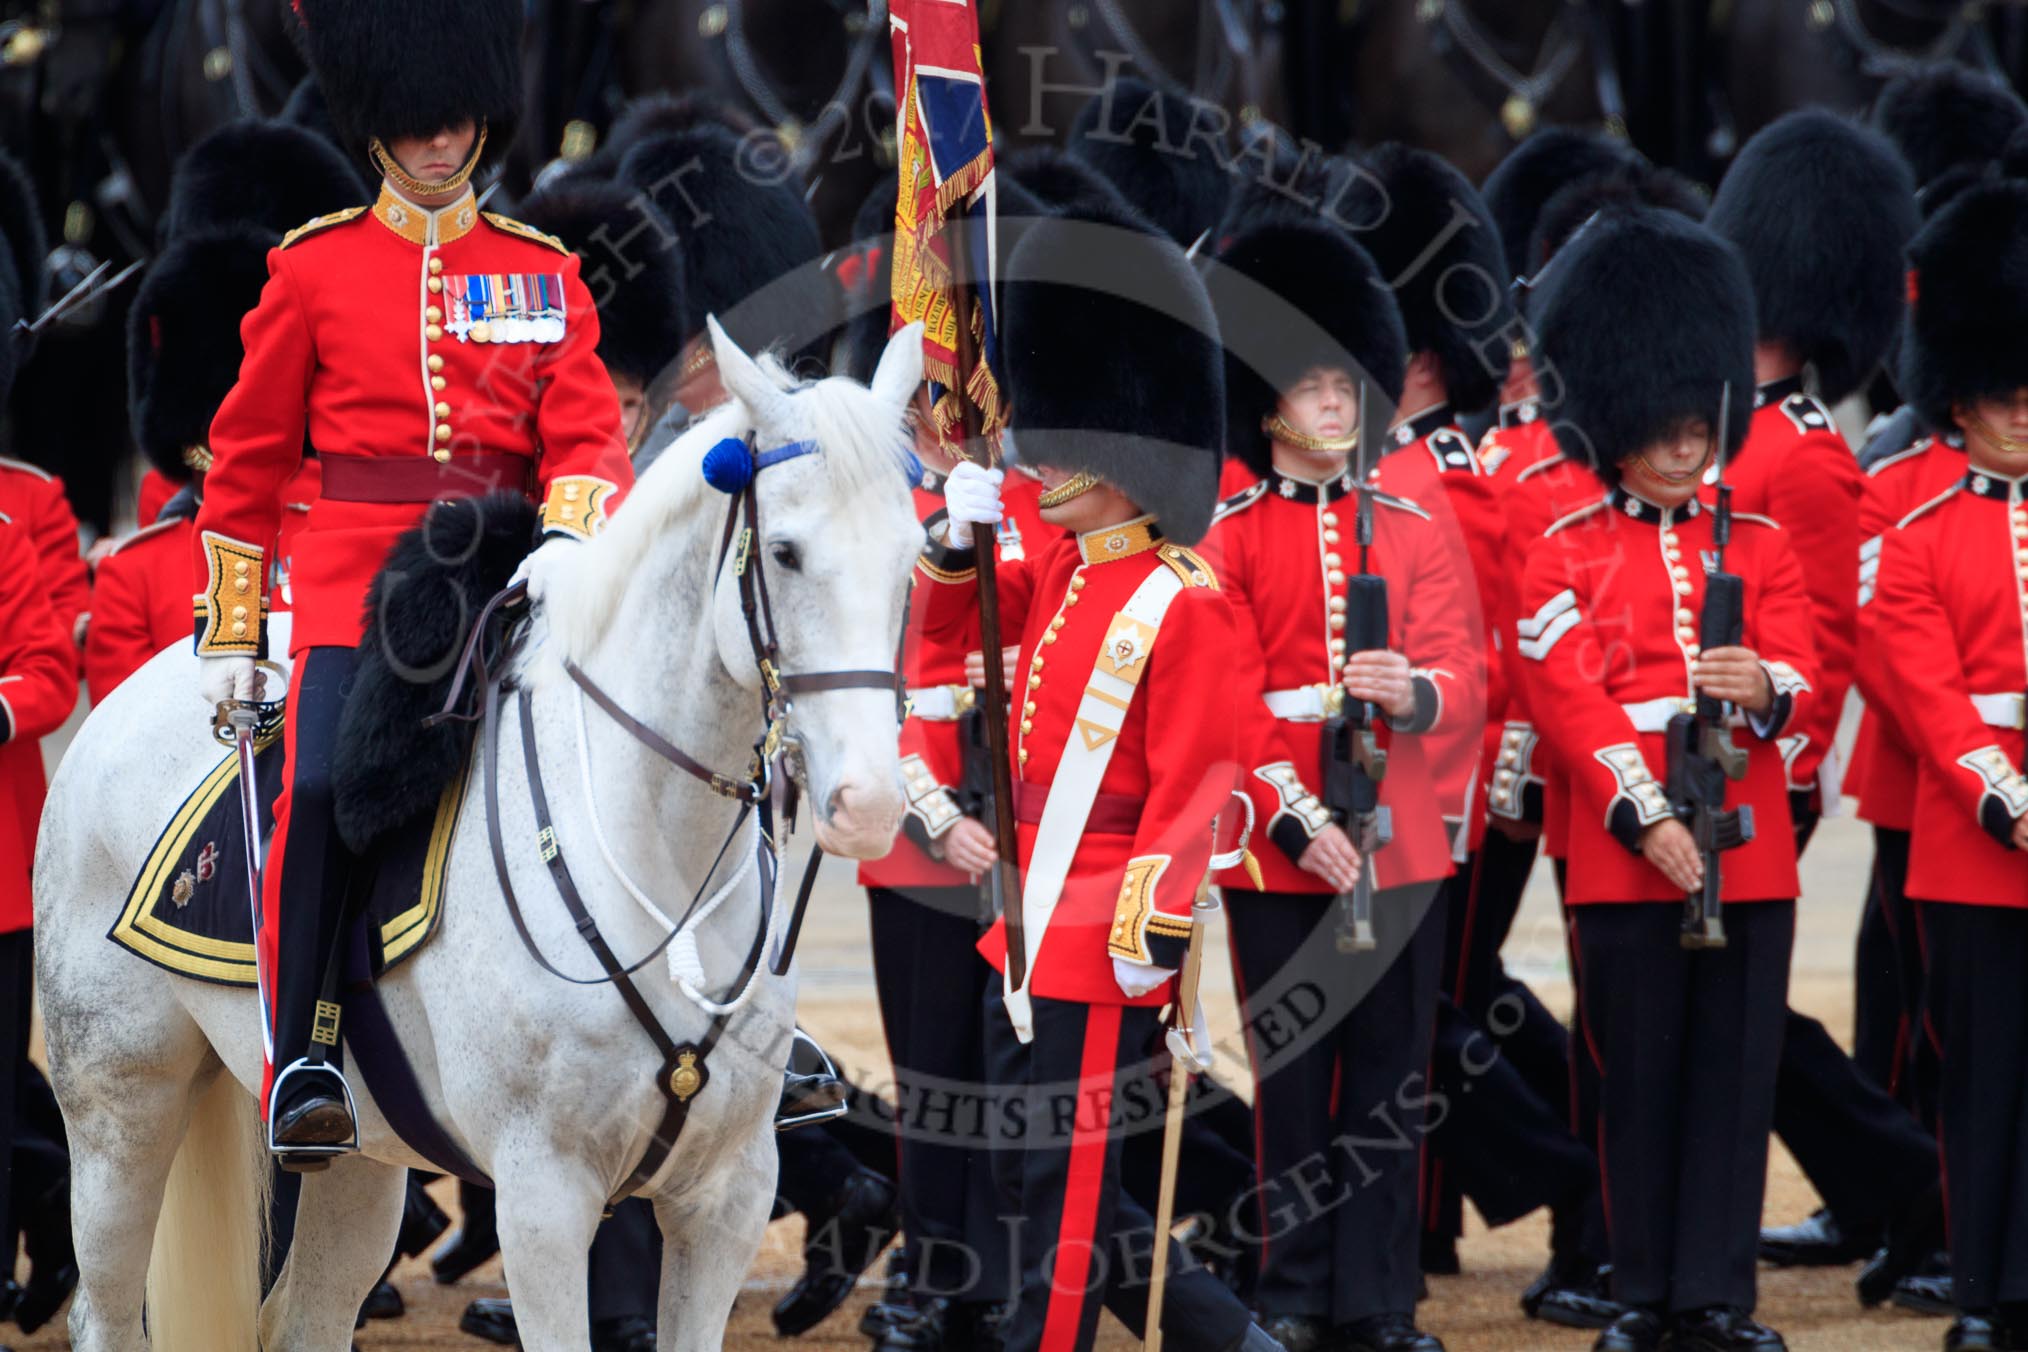 during The Colonel's Review {iptcyear4} (final rehearsal for Trooping the Colour, The Queen's Birthday Parade)  at Horse Guards Parade, Westminster, London, 2 June 2018, 11:27.